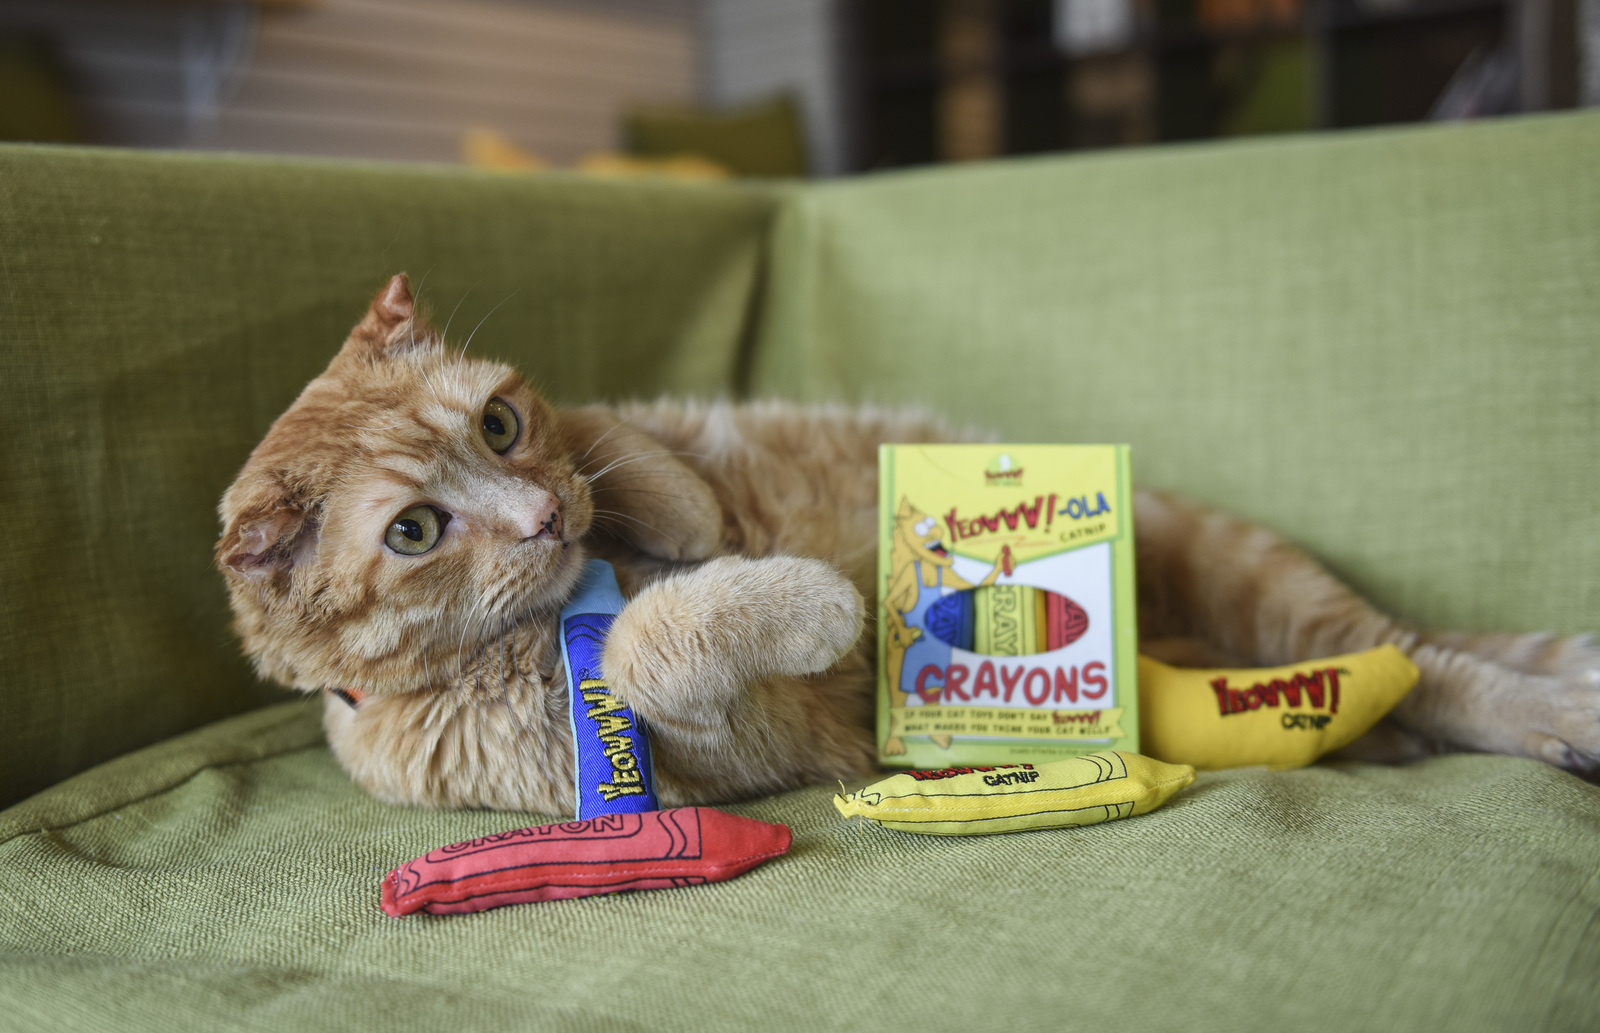 Yeowww! Cat Toys with Pure American Catnip - Yeowww!-ola Crayon image 6